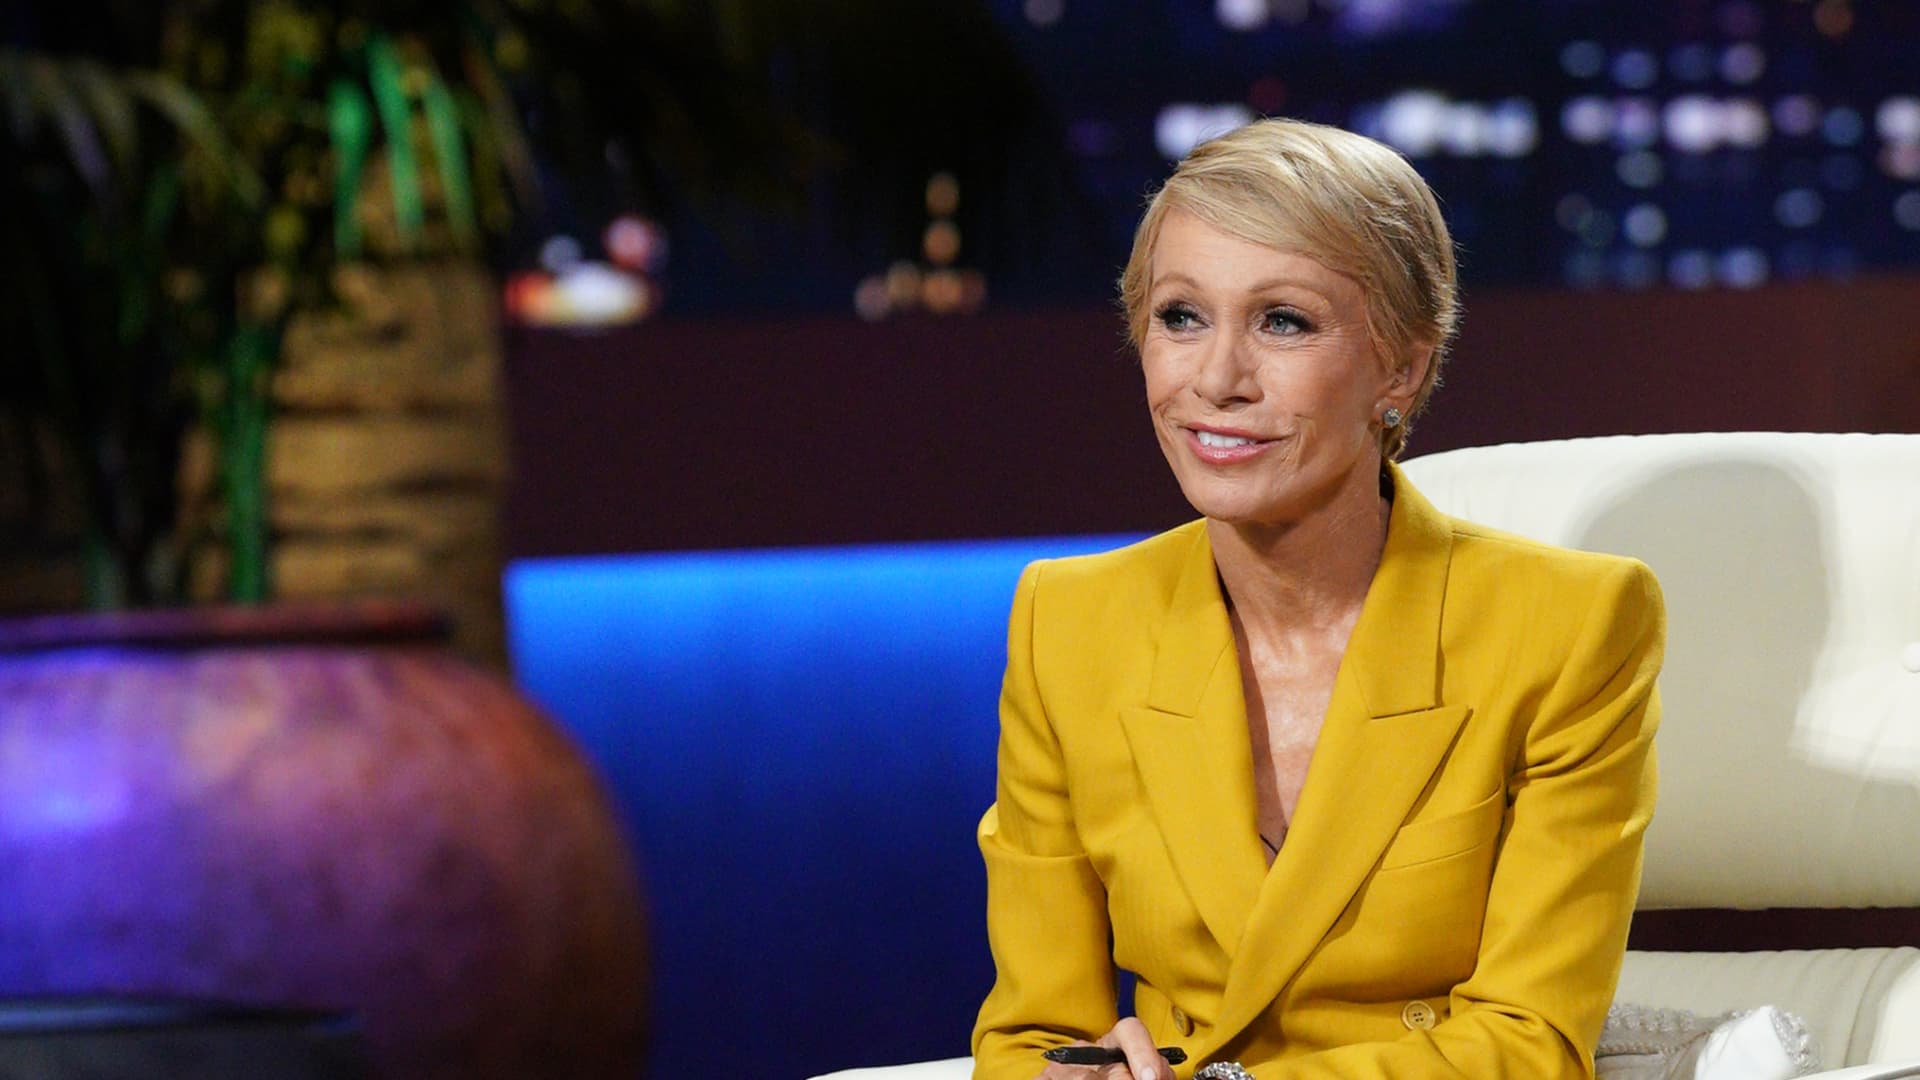 A shopping trip taught Barbara Corcoran a valuable career lesson: '7 simple words made me a much nicer person'